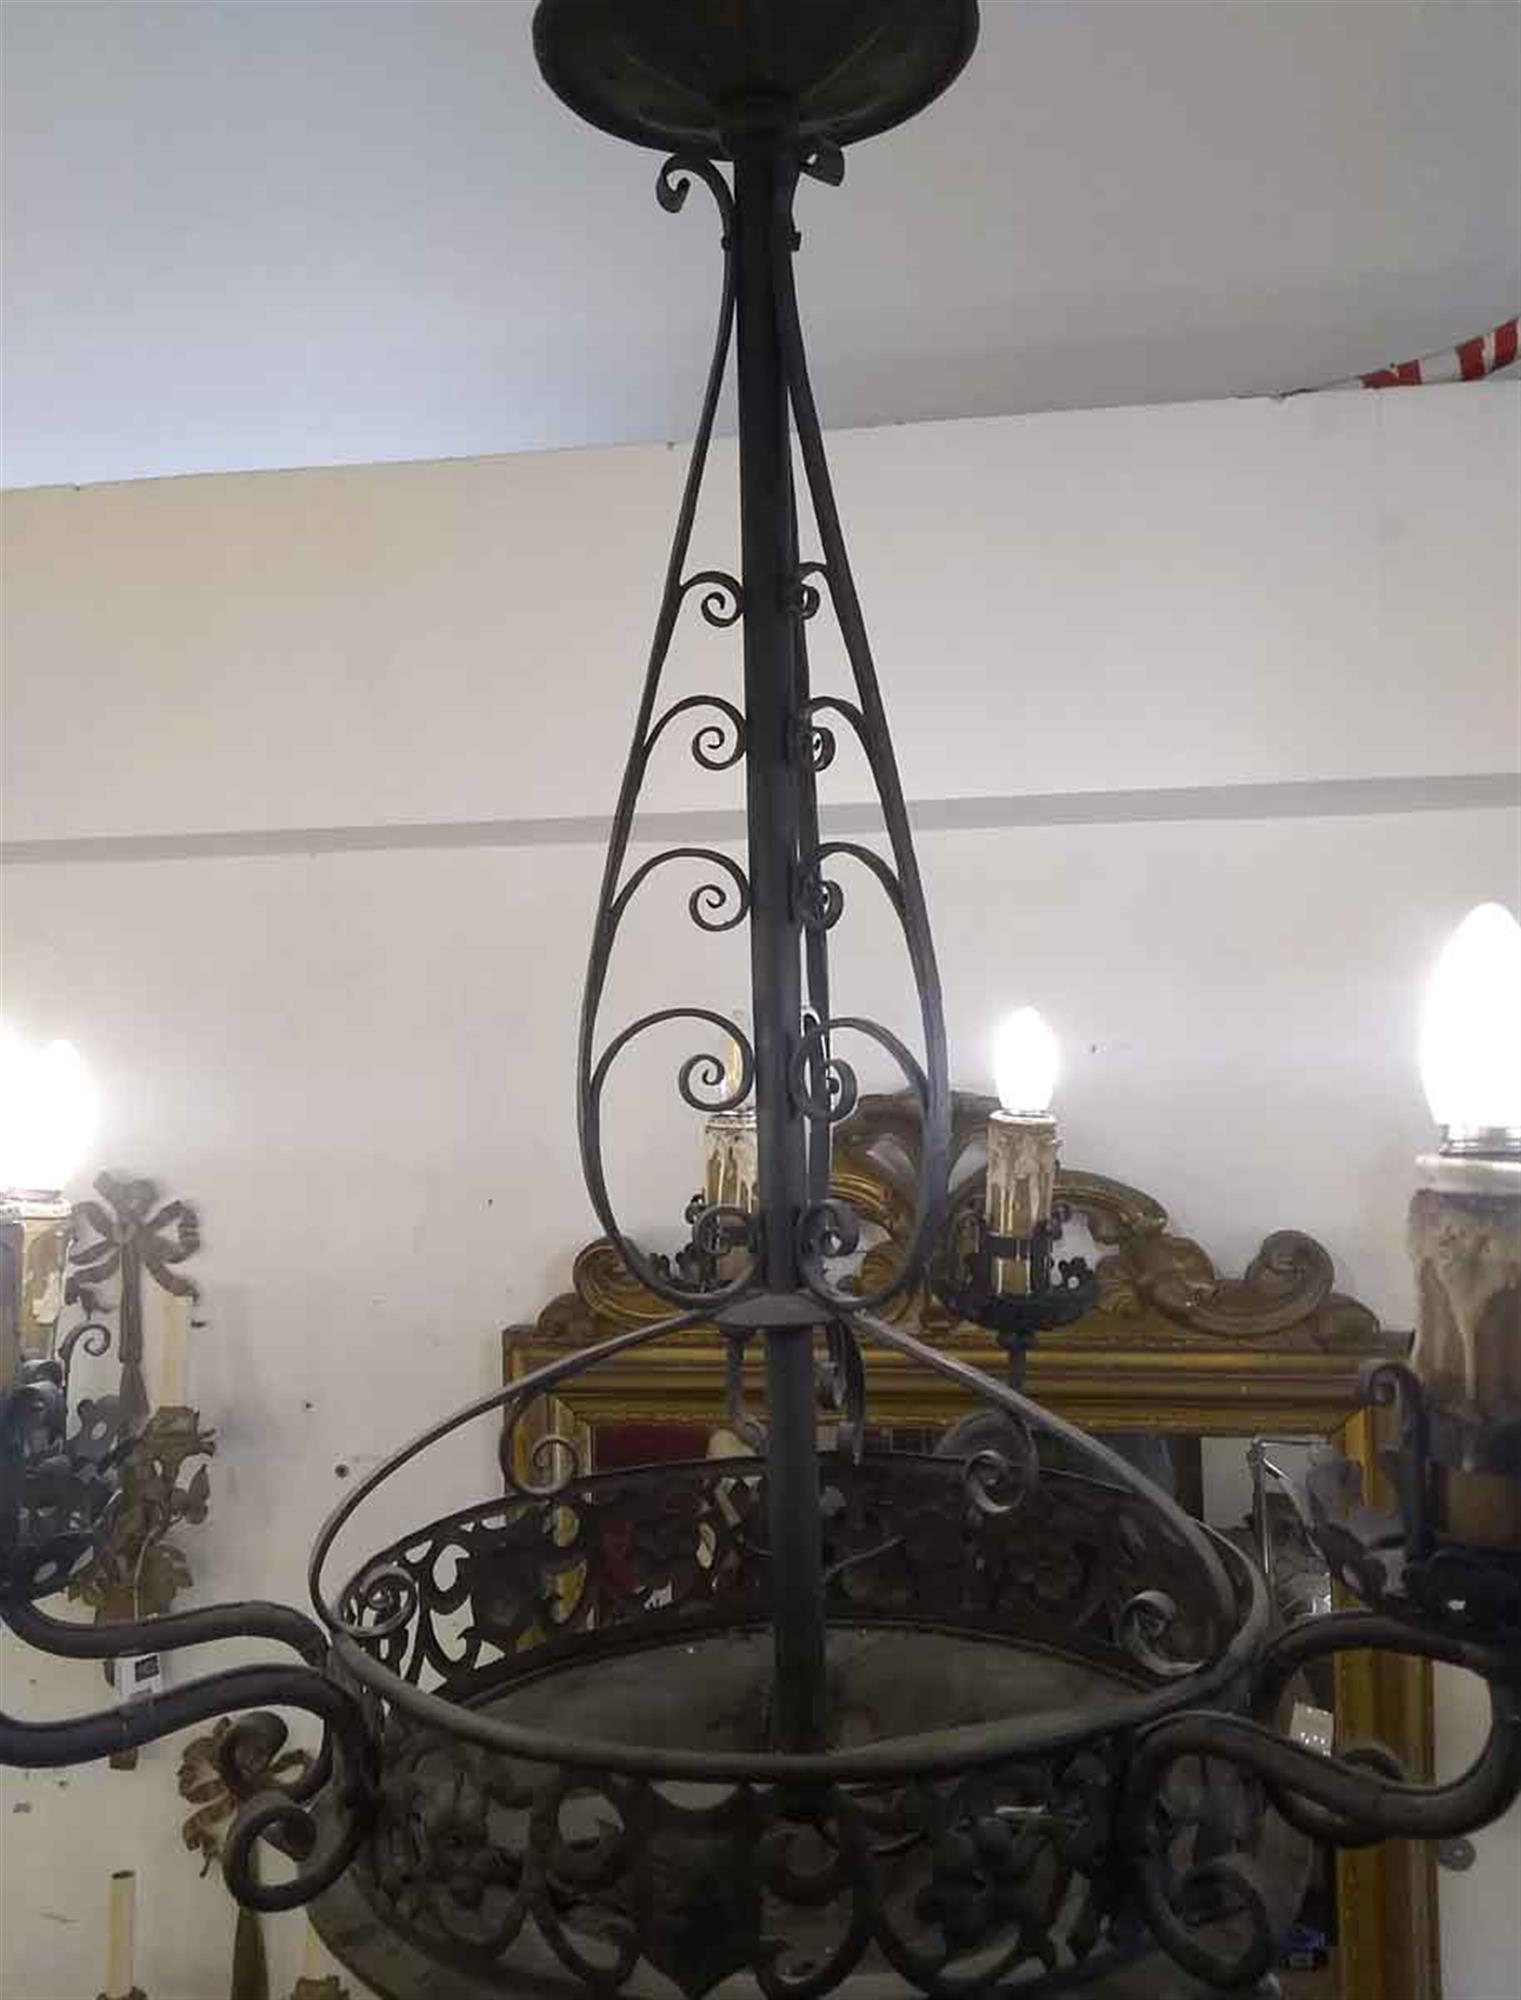 Wrought iron chandelier with turned curl details, six arms and a black finish from 1940s France. Please note, this item is located in our Scranton, PA location.